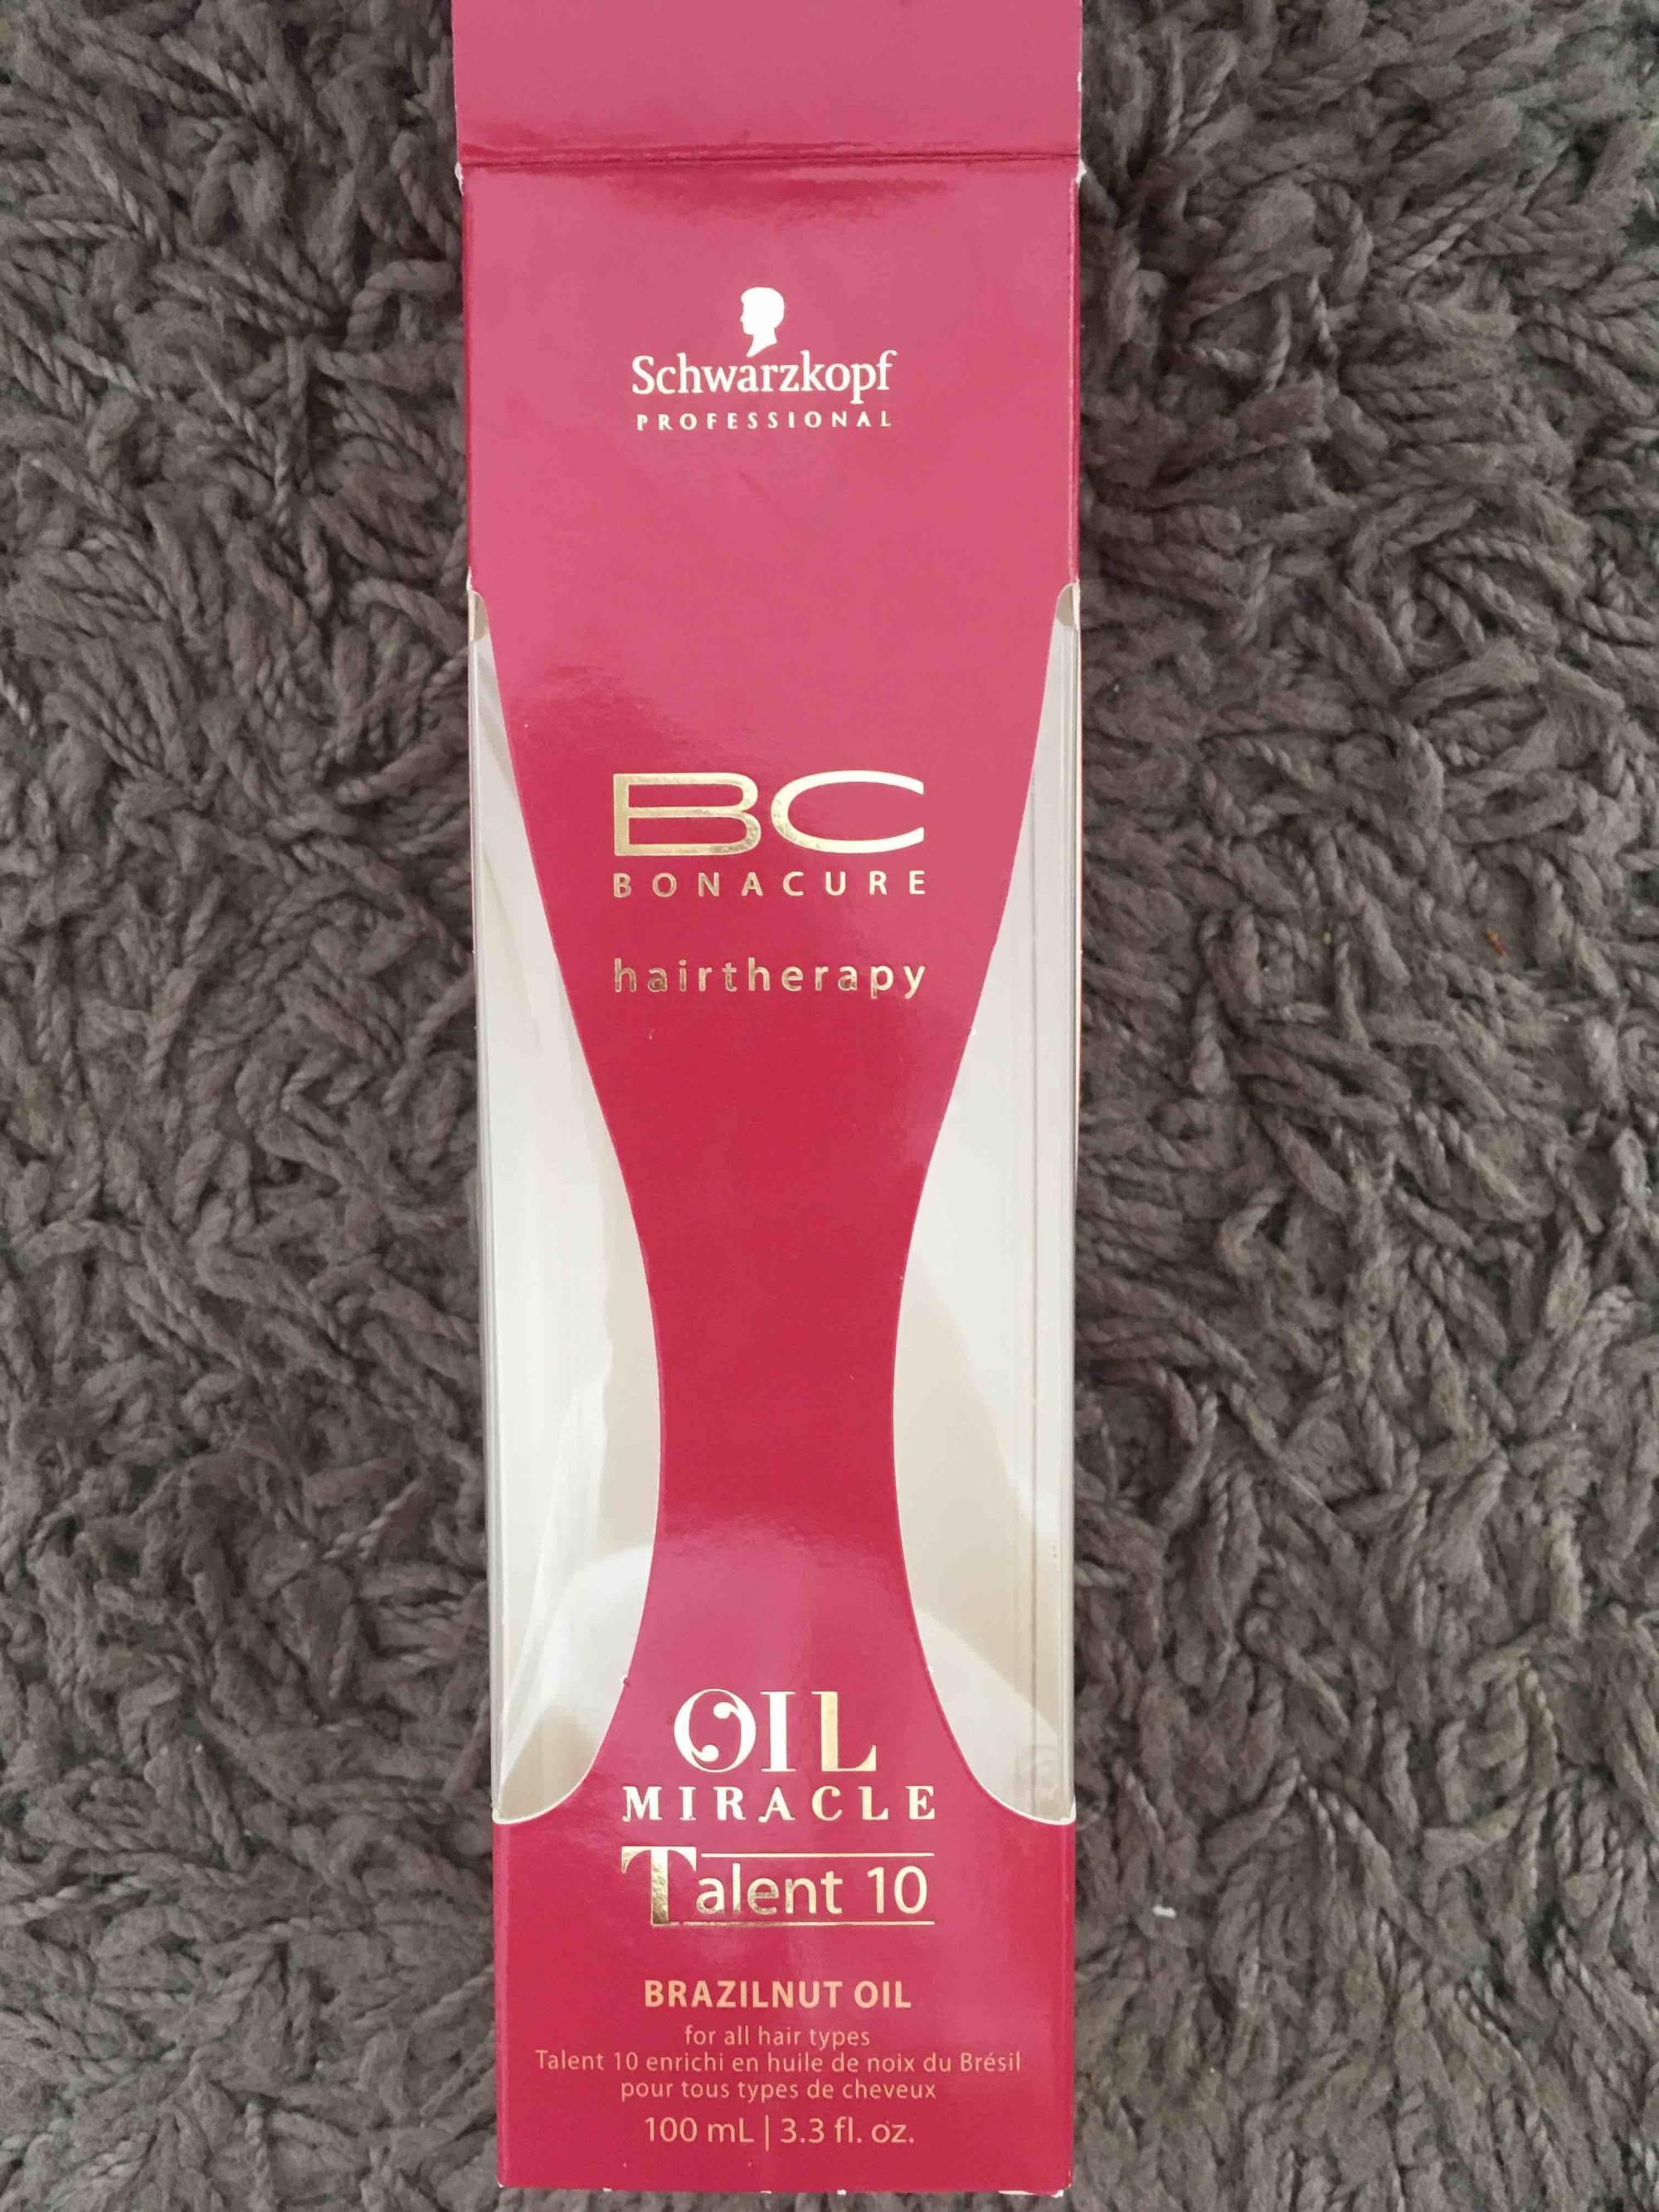 SCHWARZKOPF - BC bonacure hairtherapy - OIl miracle talent 10